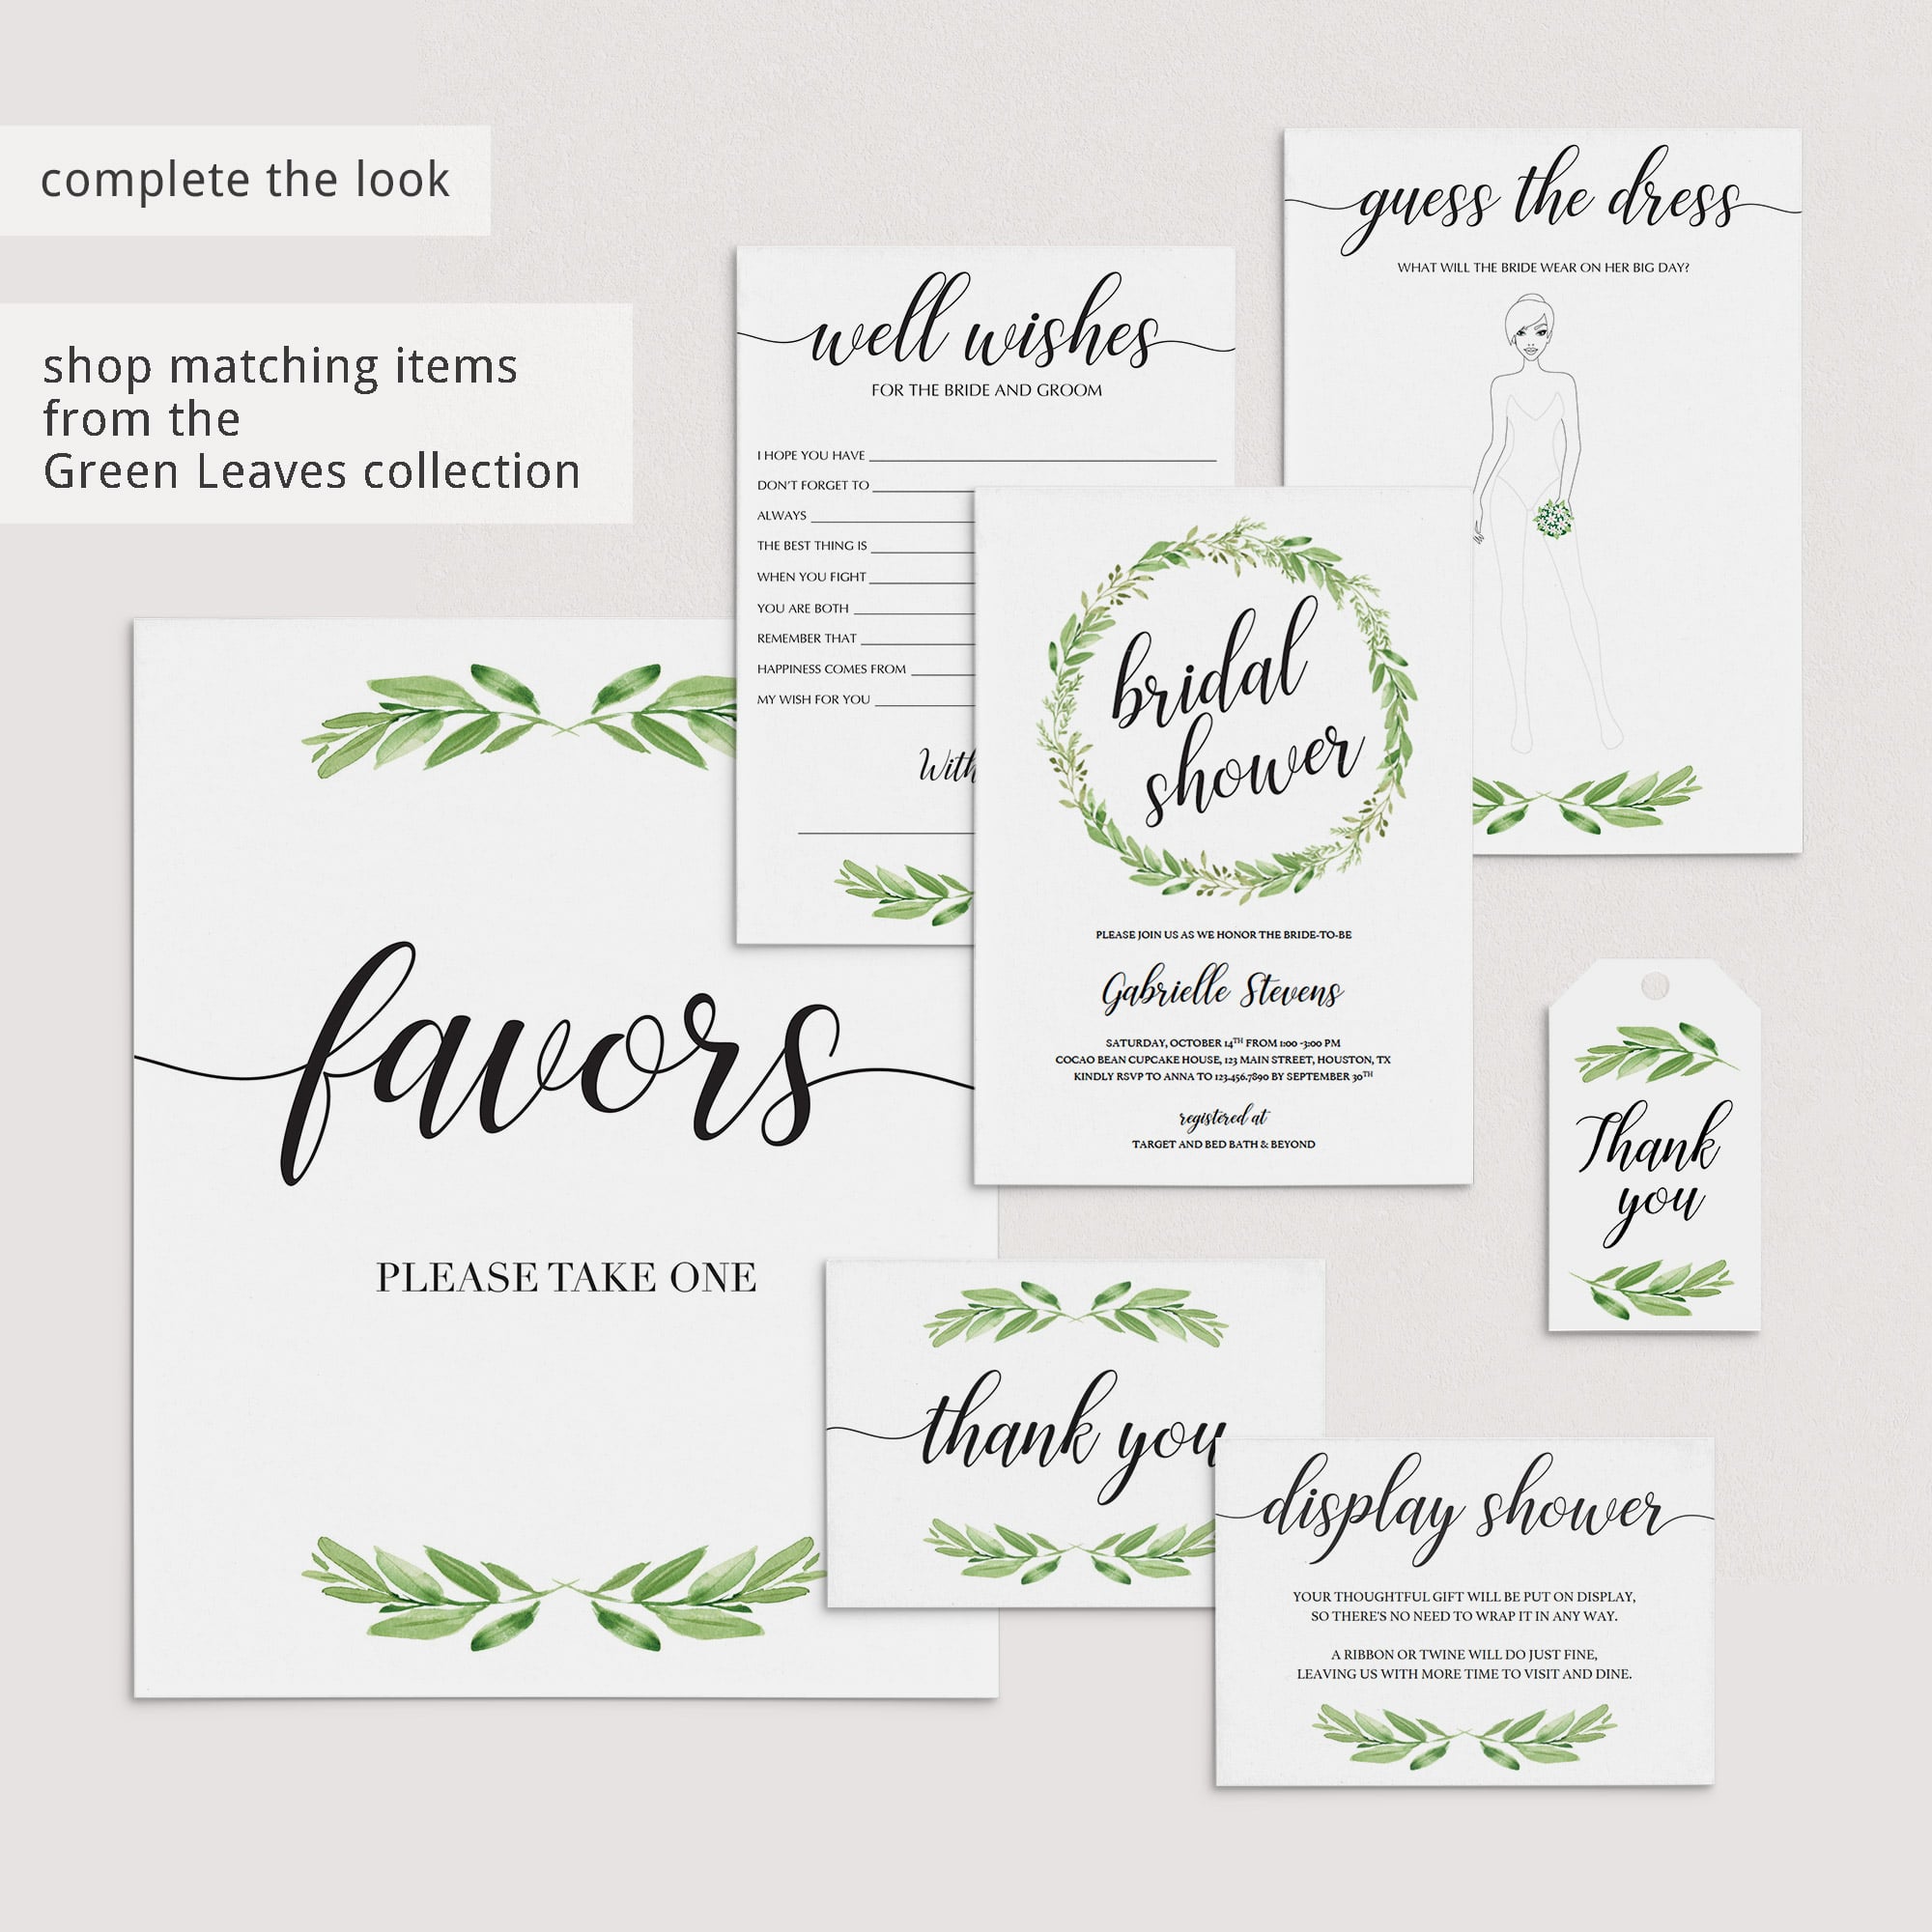 green leaf bridalshower games and decorations by LittleSizzle